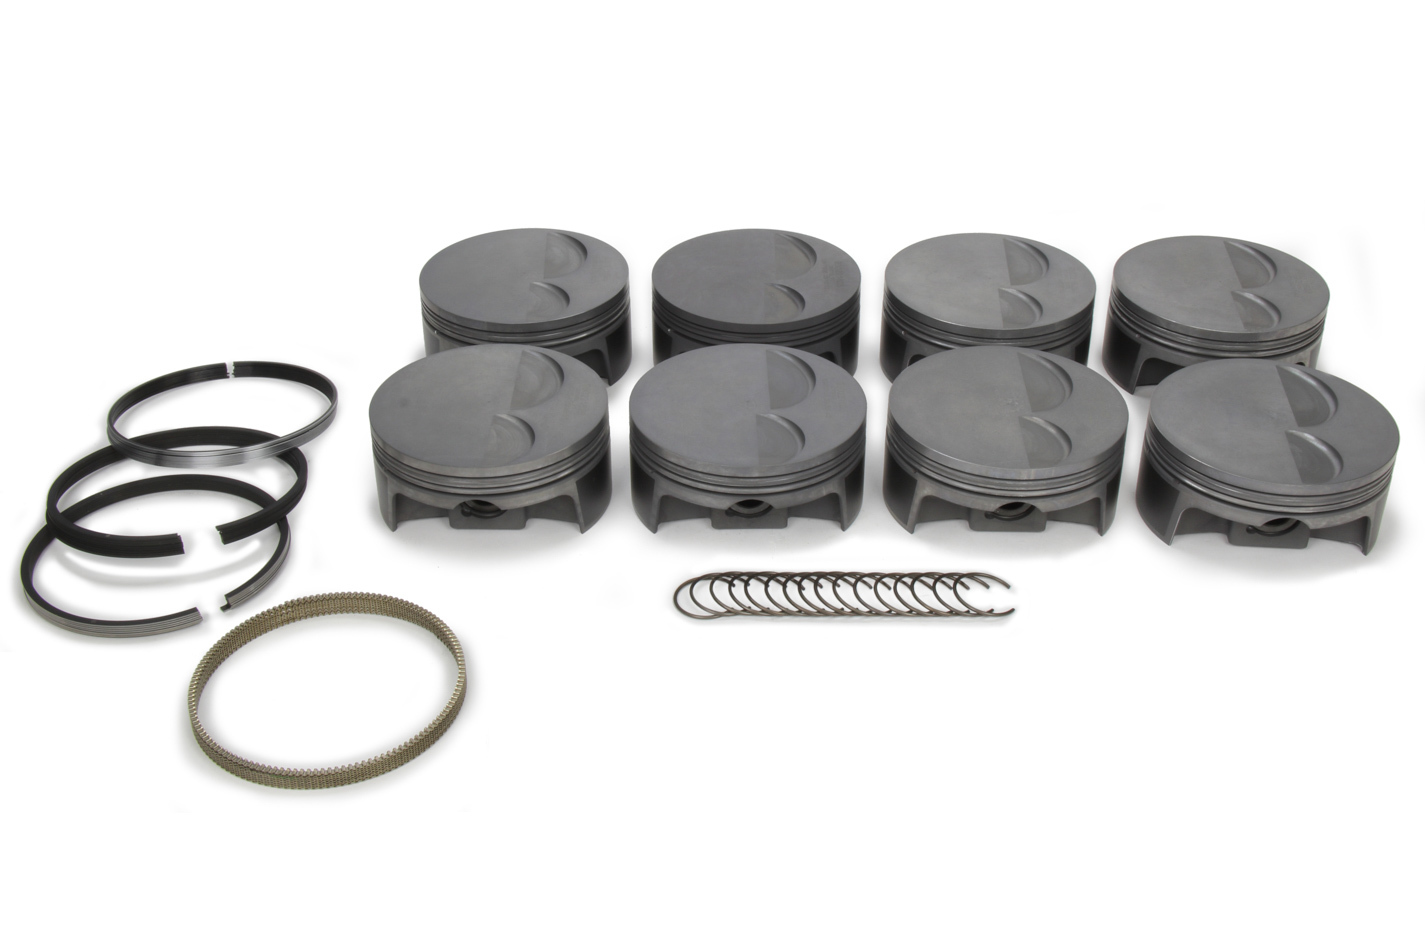 Mahle Pistons 930221625 Piston and Ring, PowerPak F/T, Forged, 4.125 in Bore, 1.0 x 1.0 x 2.0 mm Ring Grooves, Minus 2.50 cc, GM LS-Series, Kit